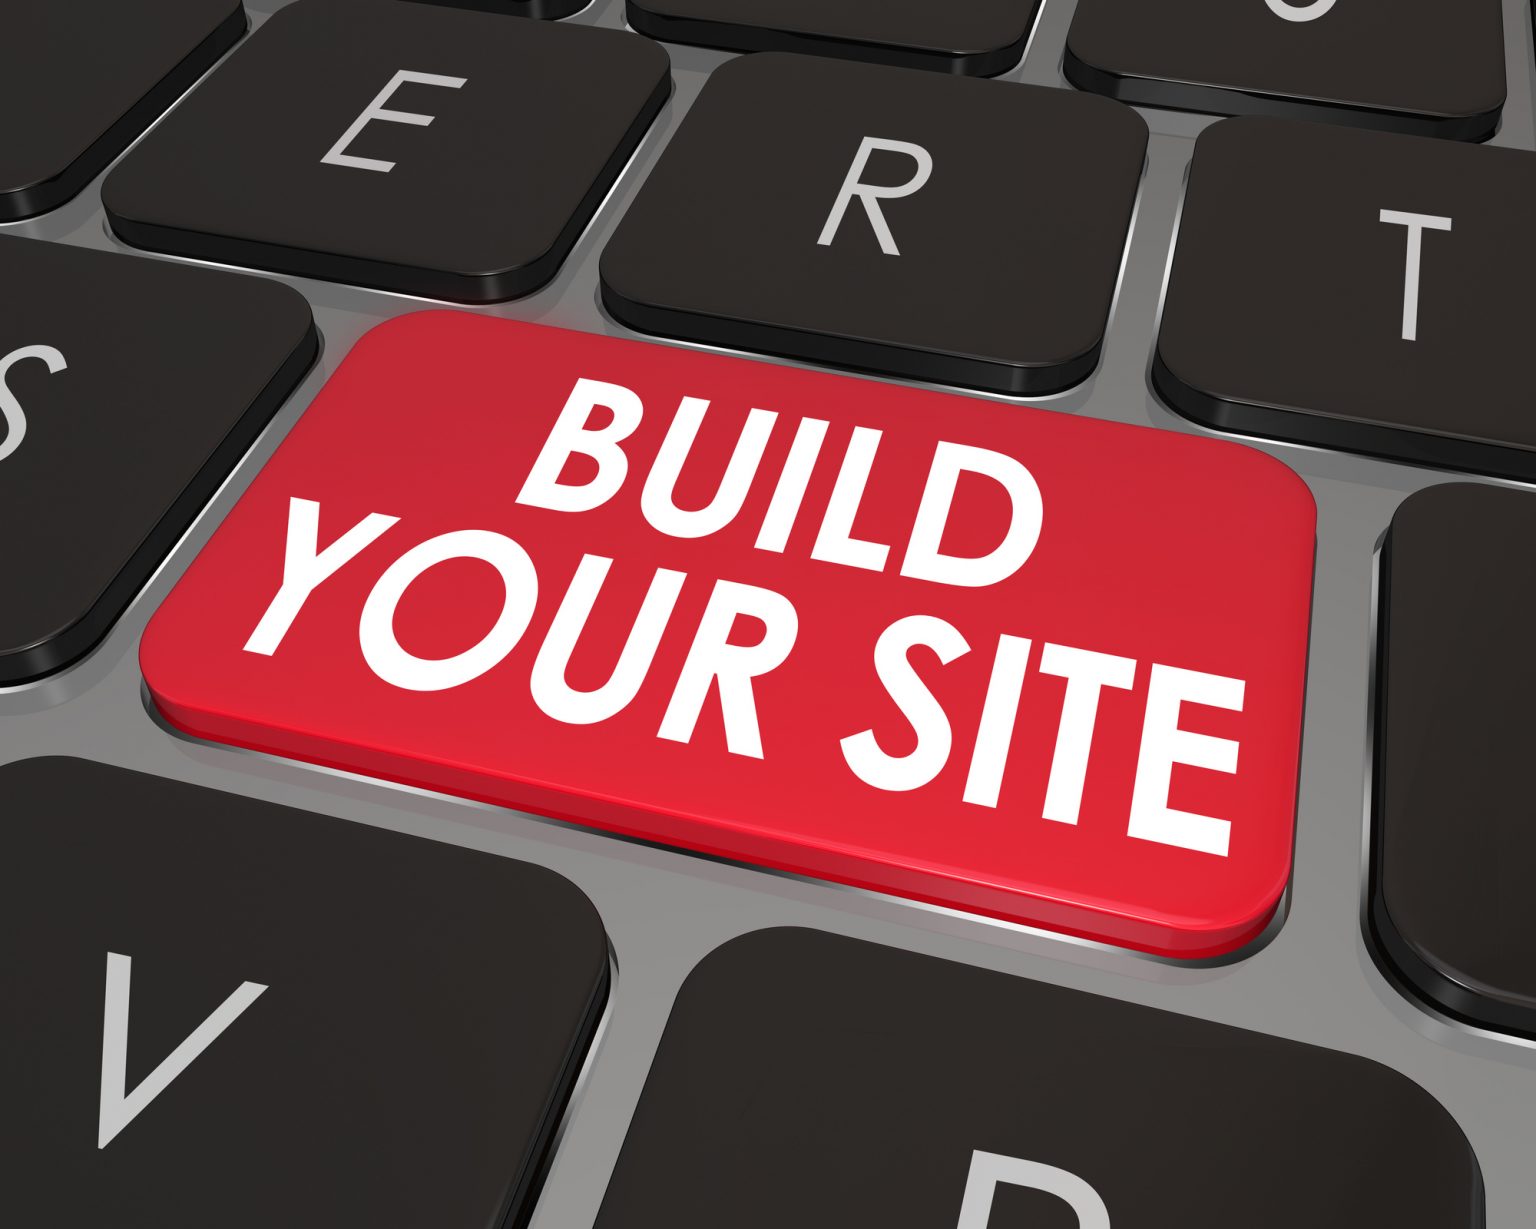 should-i-build-my-own-website-or-hire-someone-full-guide-tips-more